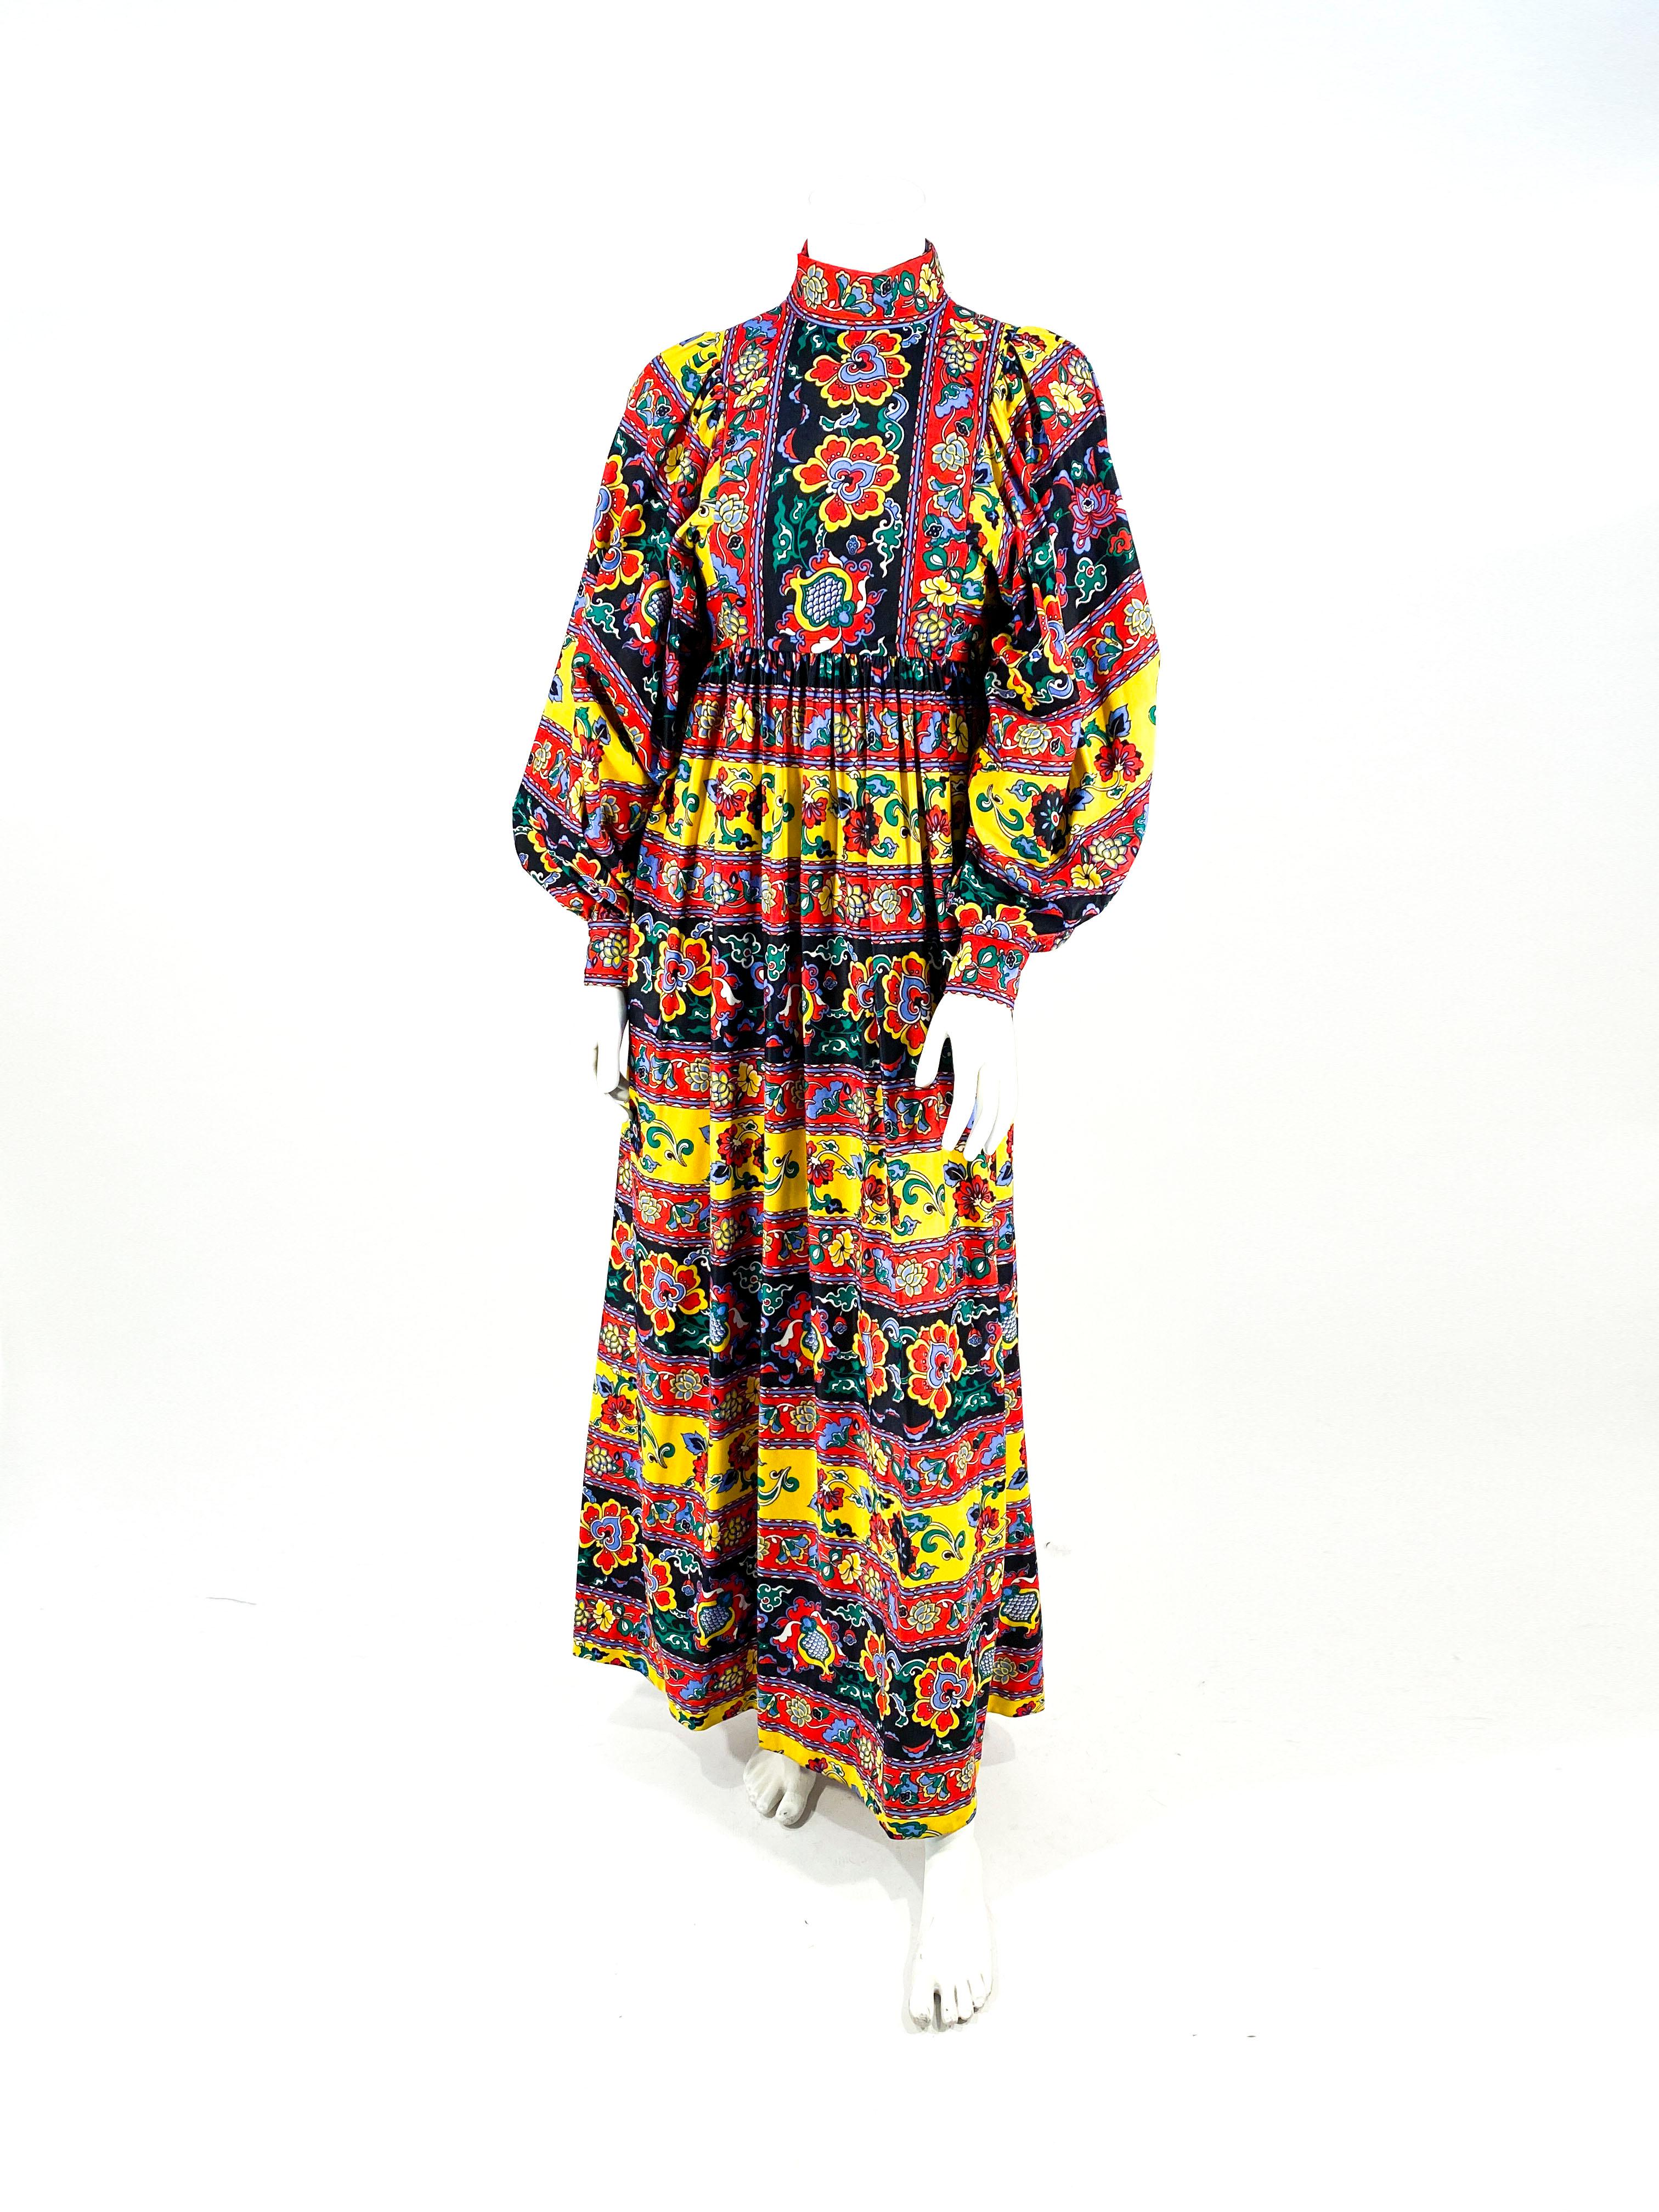 Women's 1970s Jewel-Toned Paisley Printed Peasant Dress For Sale